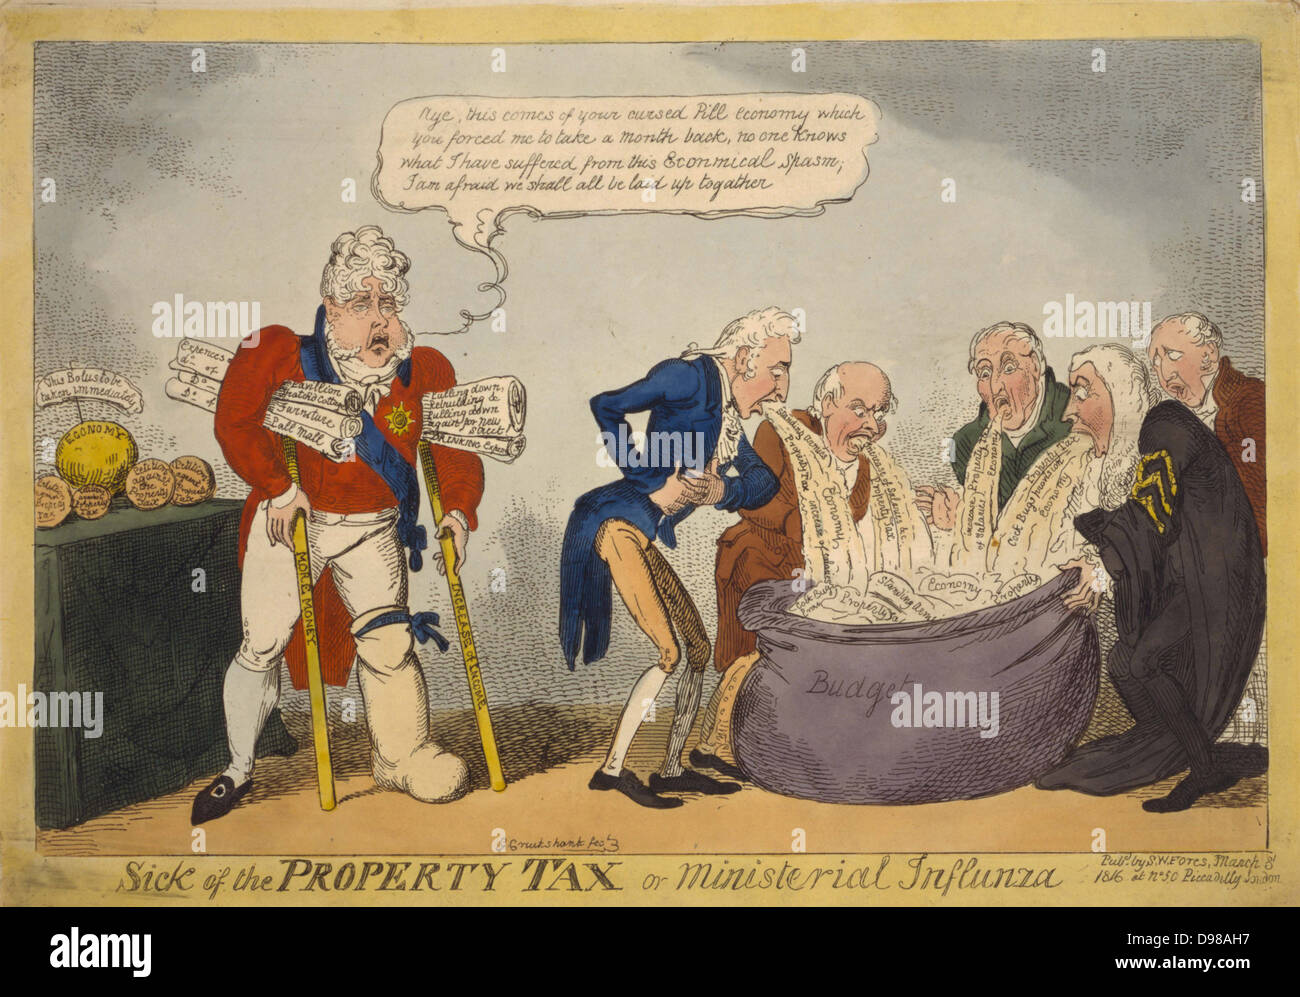 Sick of the property tax or ministerial influnza': Prince Regent (later George IV) gouty and on crutches labelled 'More Money', and 'Increase in Income, and holding documents naming his extravagant expenses, hobbles towards his ministers who are vomiting new taxes into a sack labelled Budget. Cartoon 1816. Stock Photo